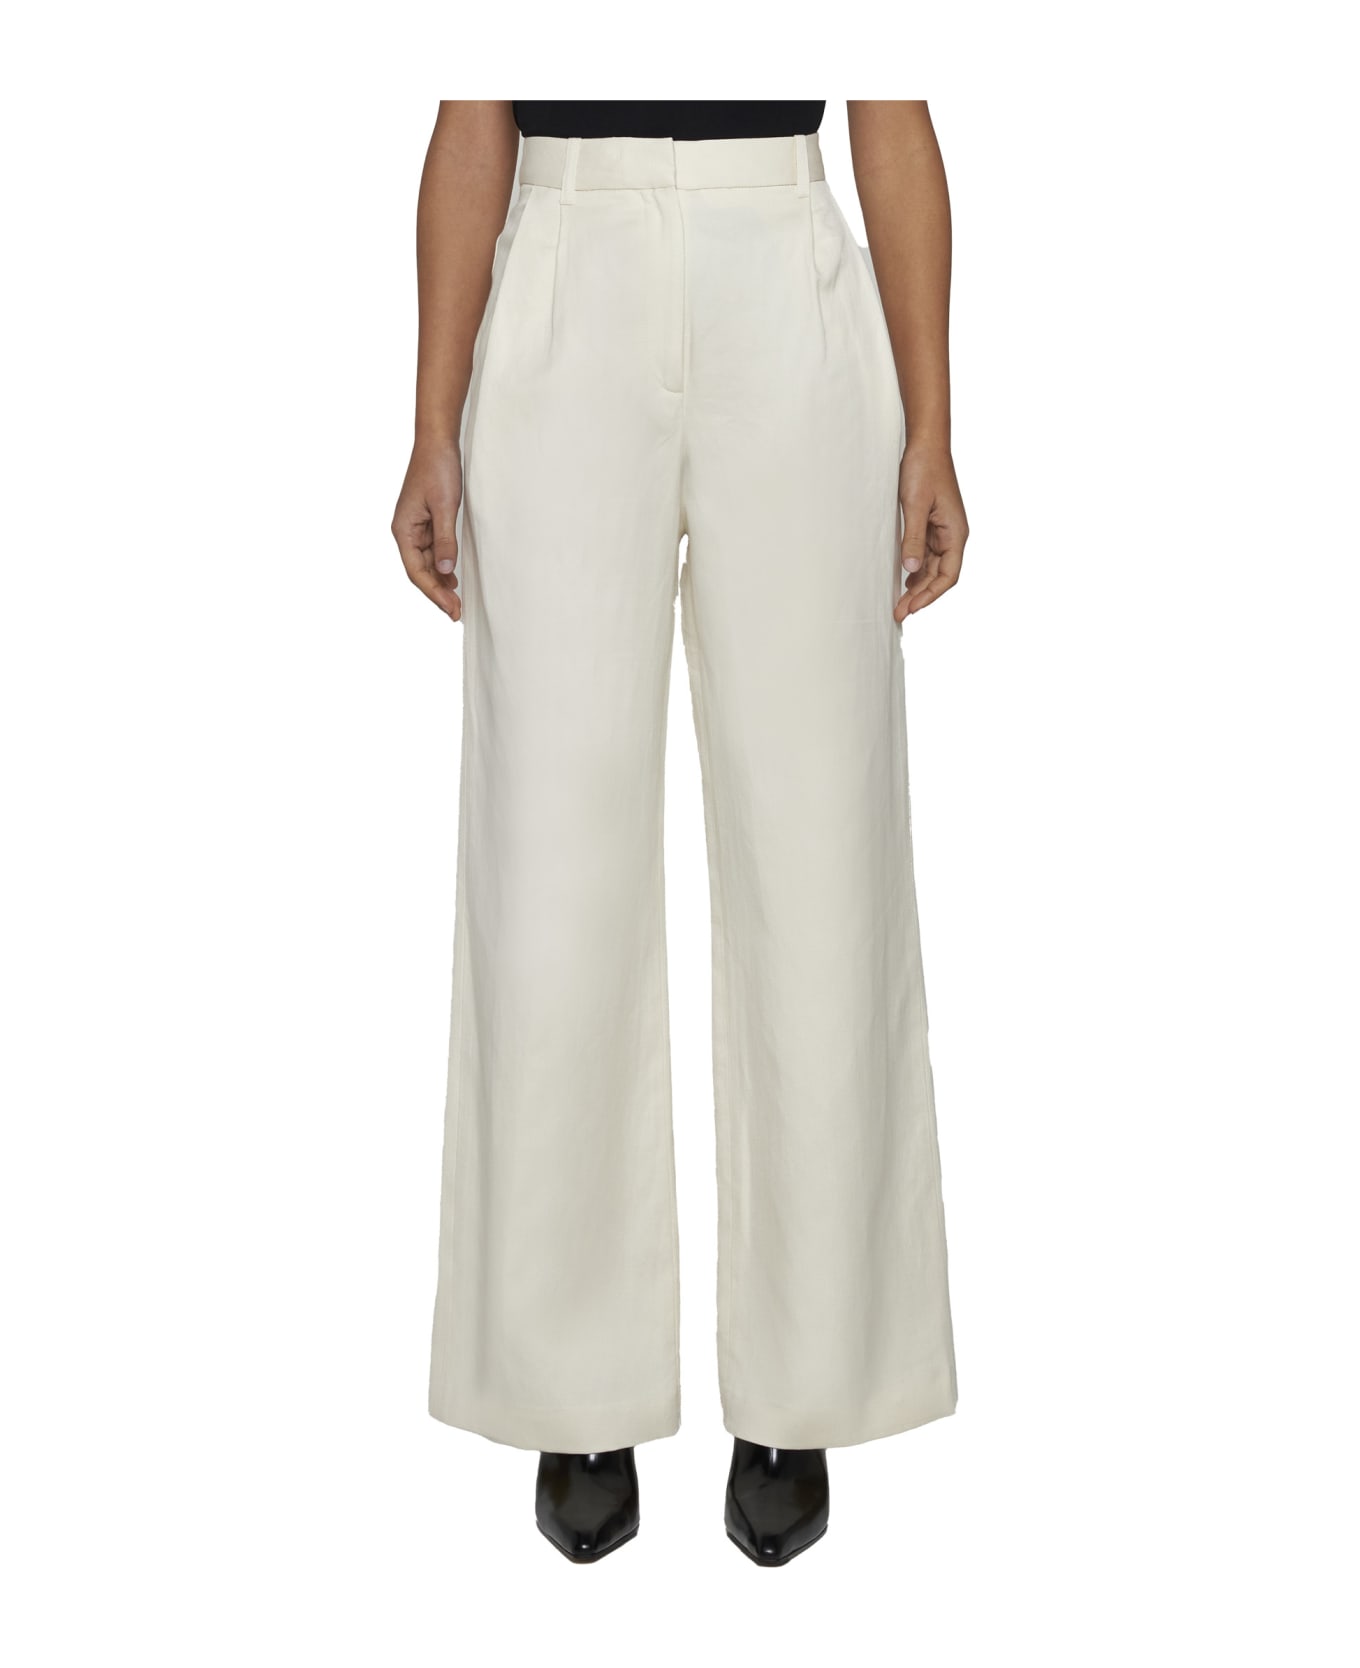 Loulou Studio Pants - Forest ivory